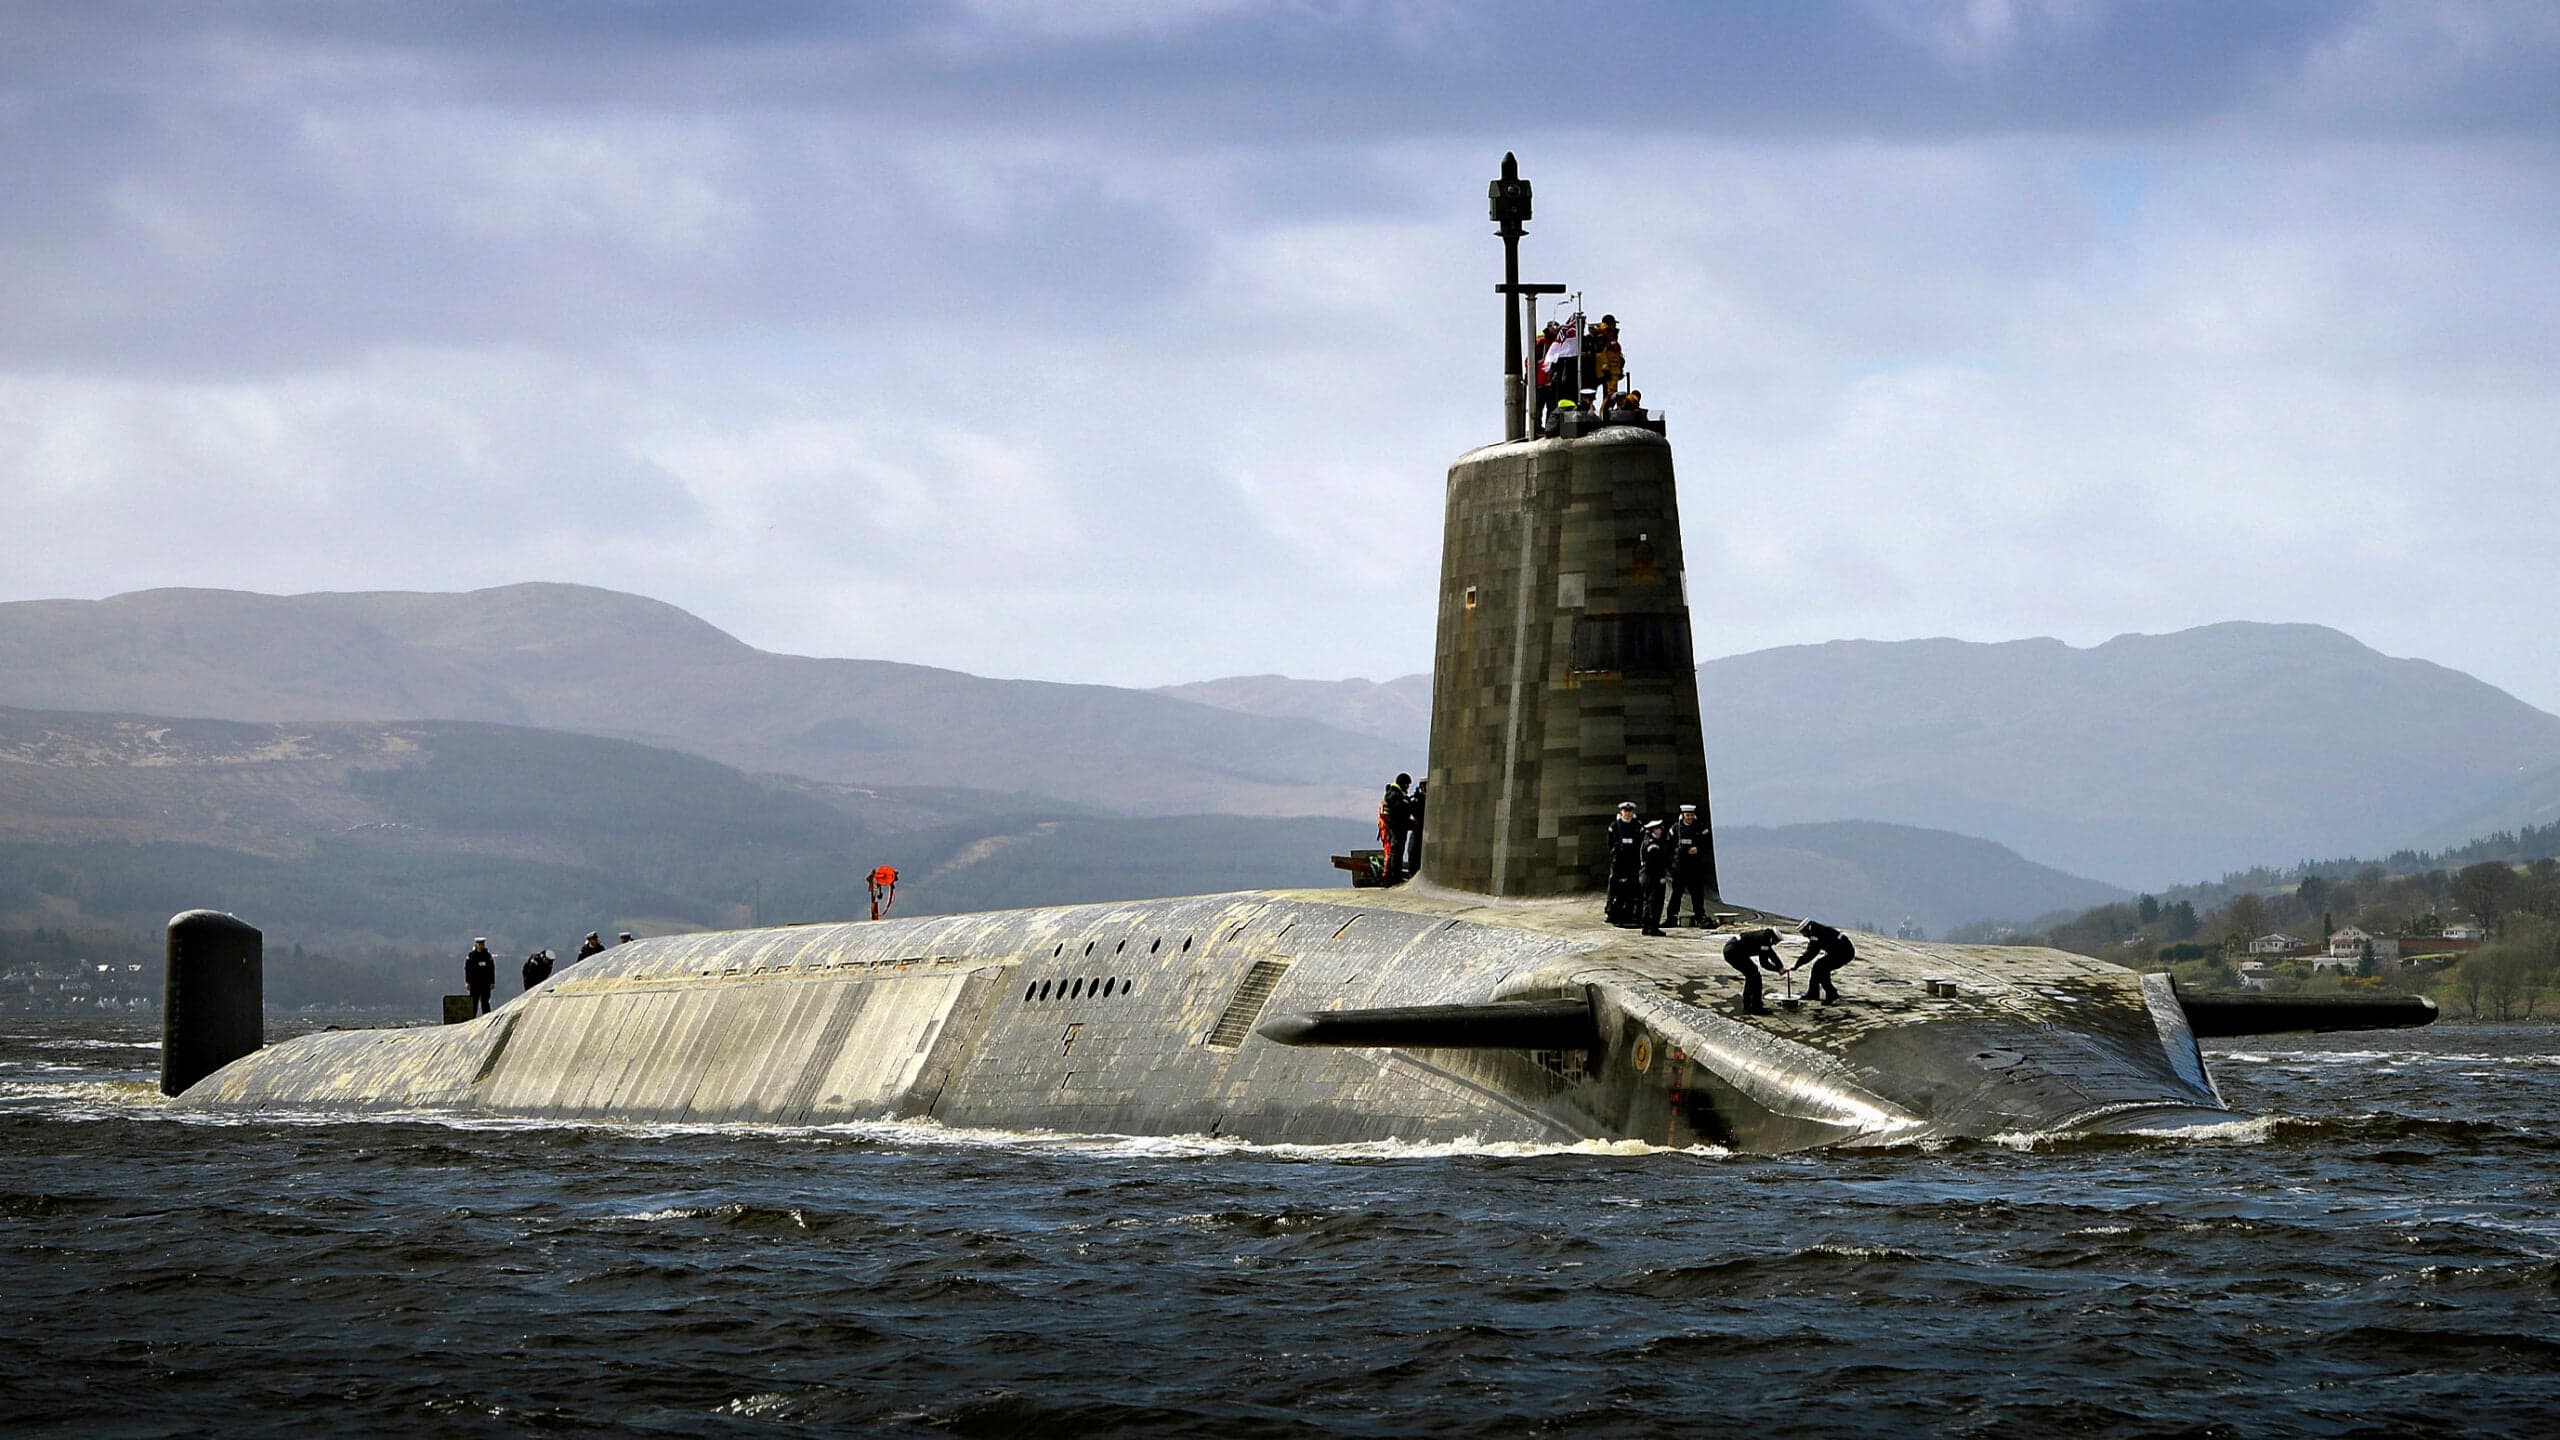 The UK Says It Could Now Use Nuclear Weapons Against Threats From “Emerging Technologies”